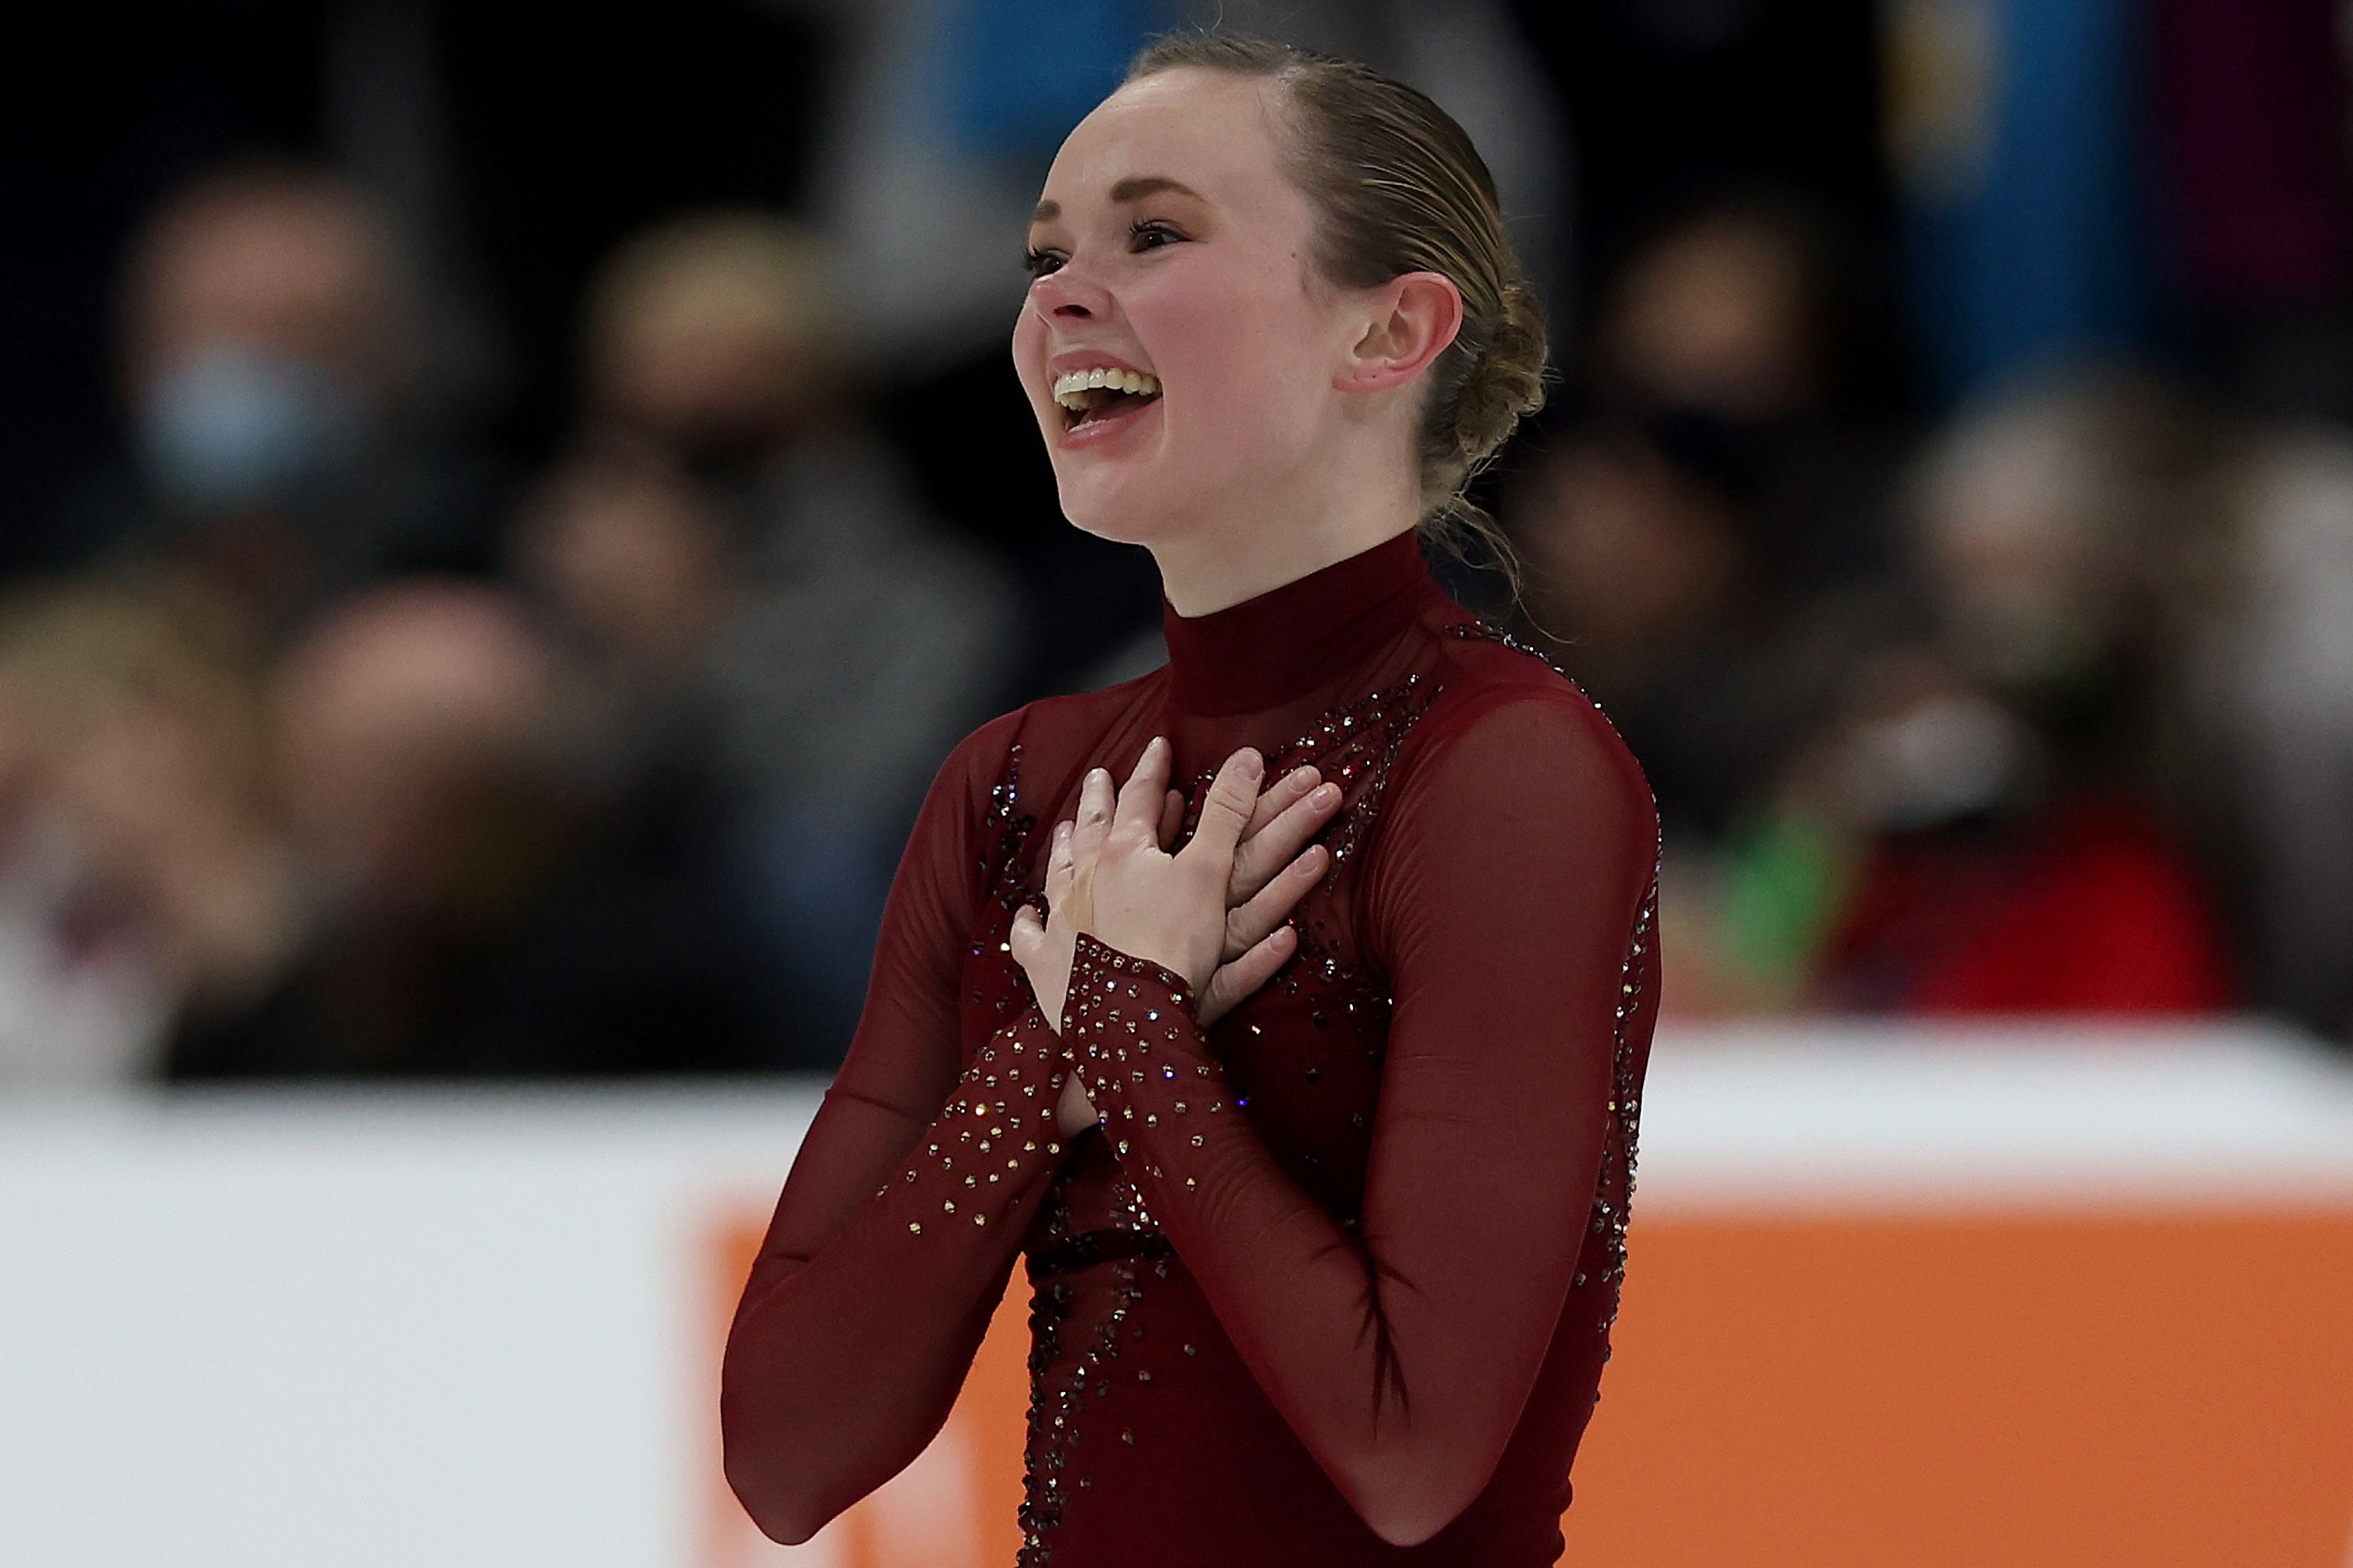 Mariah Bell reacts after skating in the Ladies Free Skate during the U.S. Figure Skating Championships at Bridgestone Arena on January 07, 2022 in Nashville, Tennessee. 